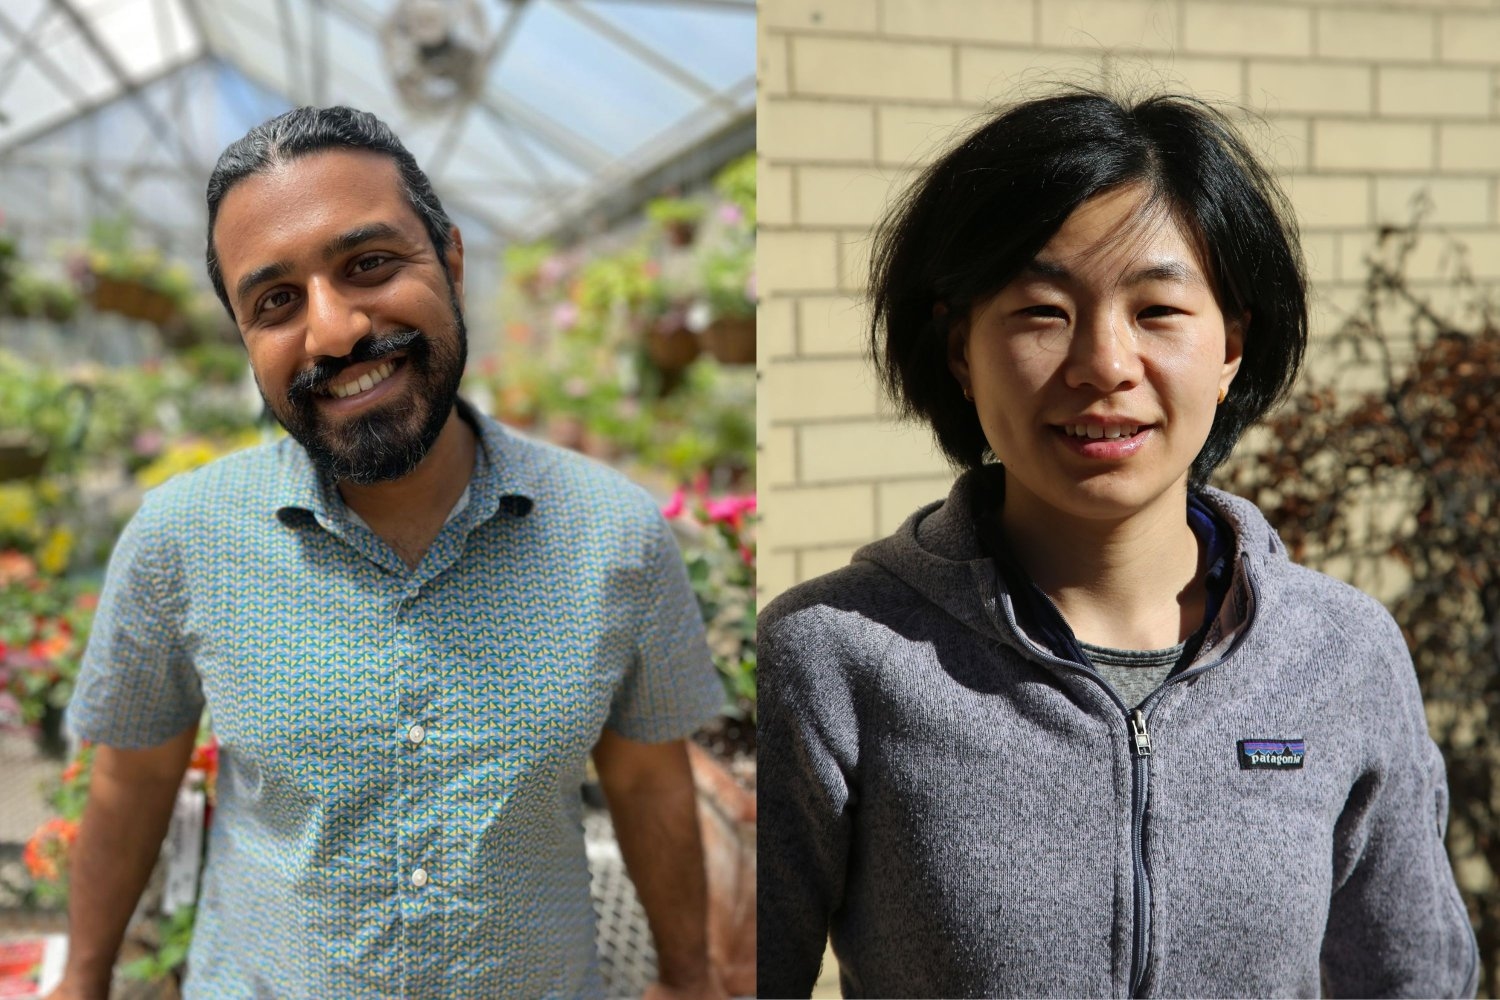 MIT PhD students honored for their work to solve critical issues in water and food